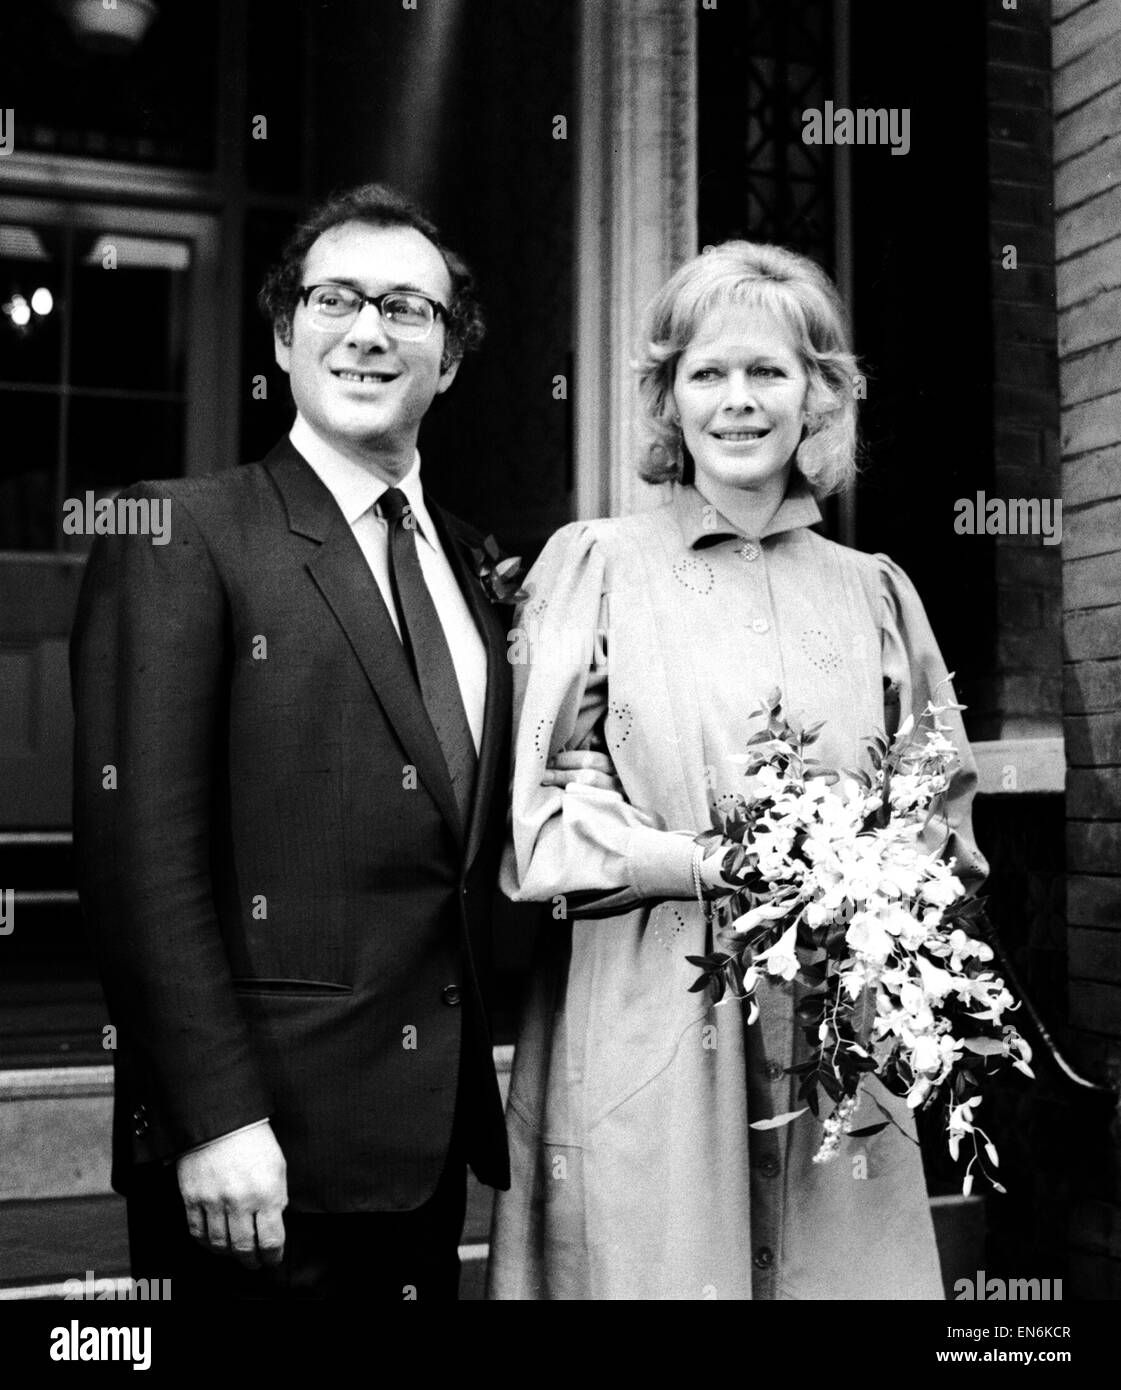 Wedding of playwright Harold Pinter and author Lady Antonia Fraser at Kensington Registry Office. 27th November 1980. Stock Photo